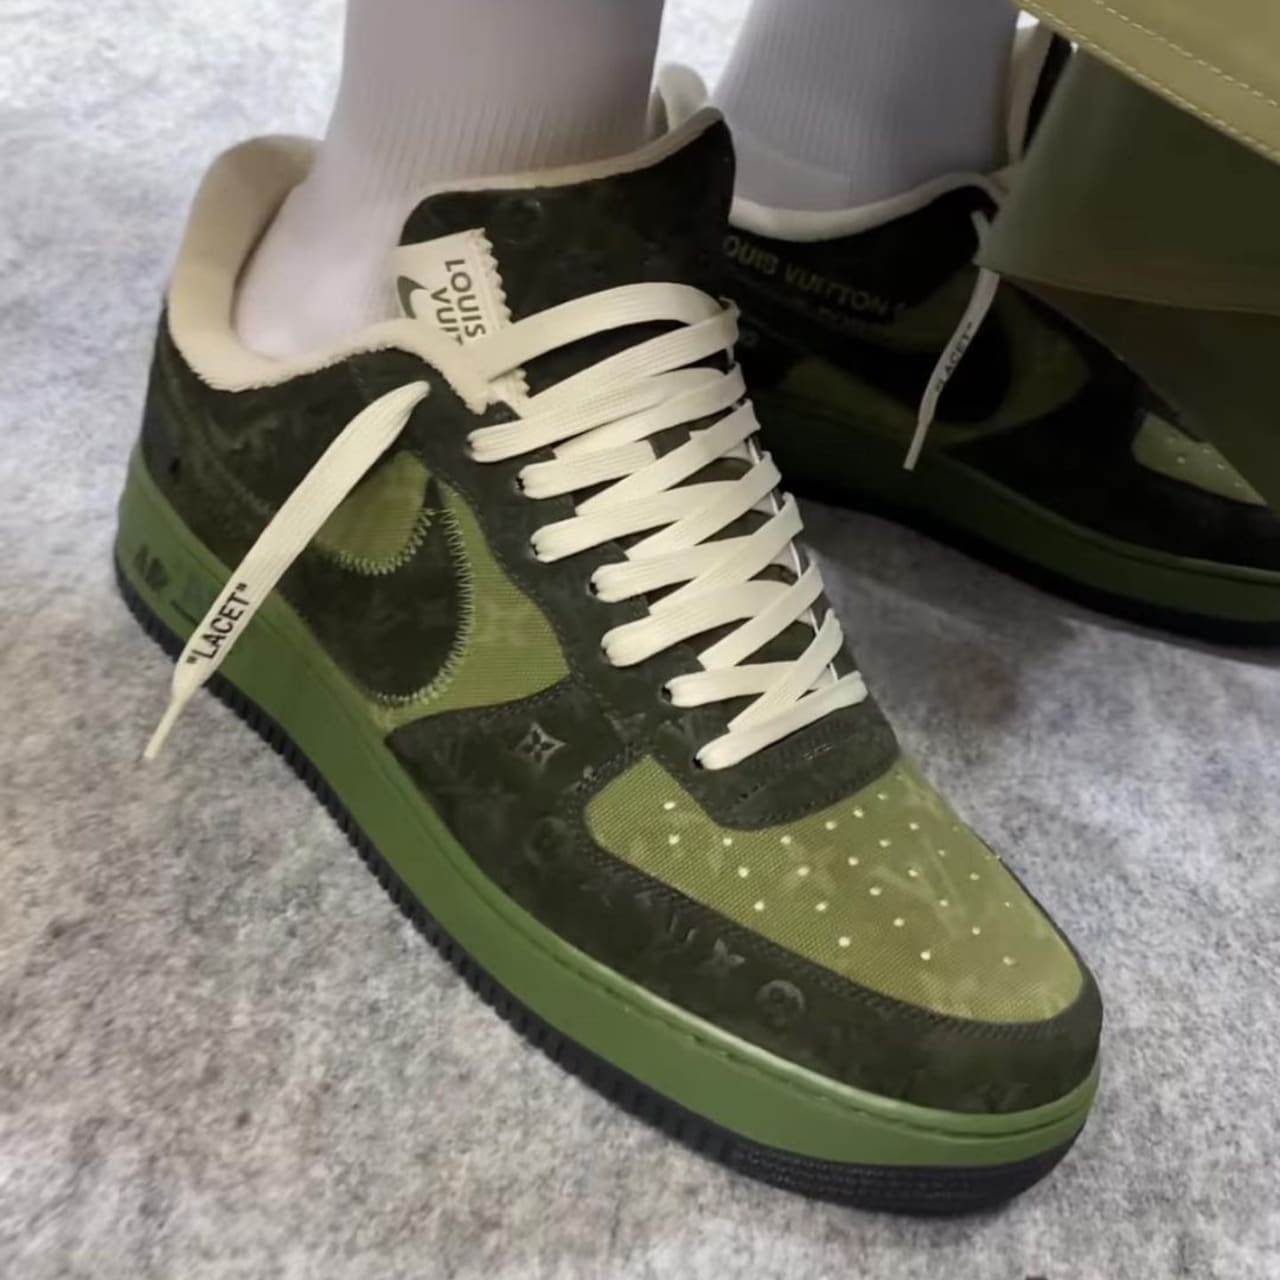 Every Louis Vuitton x Nike Air Force 1 Colorway So Far | Complex